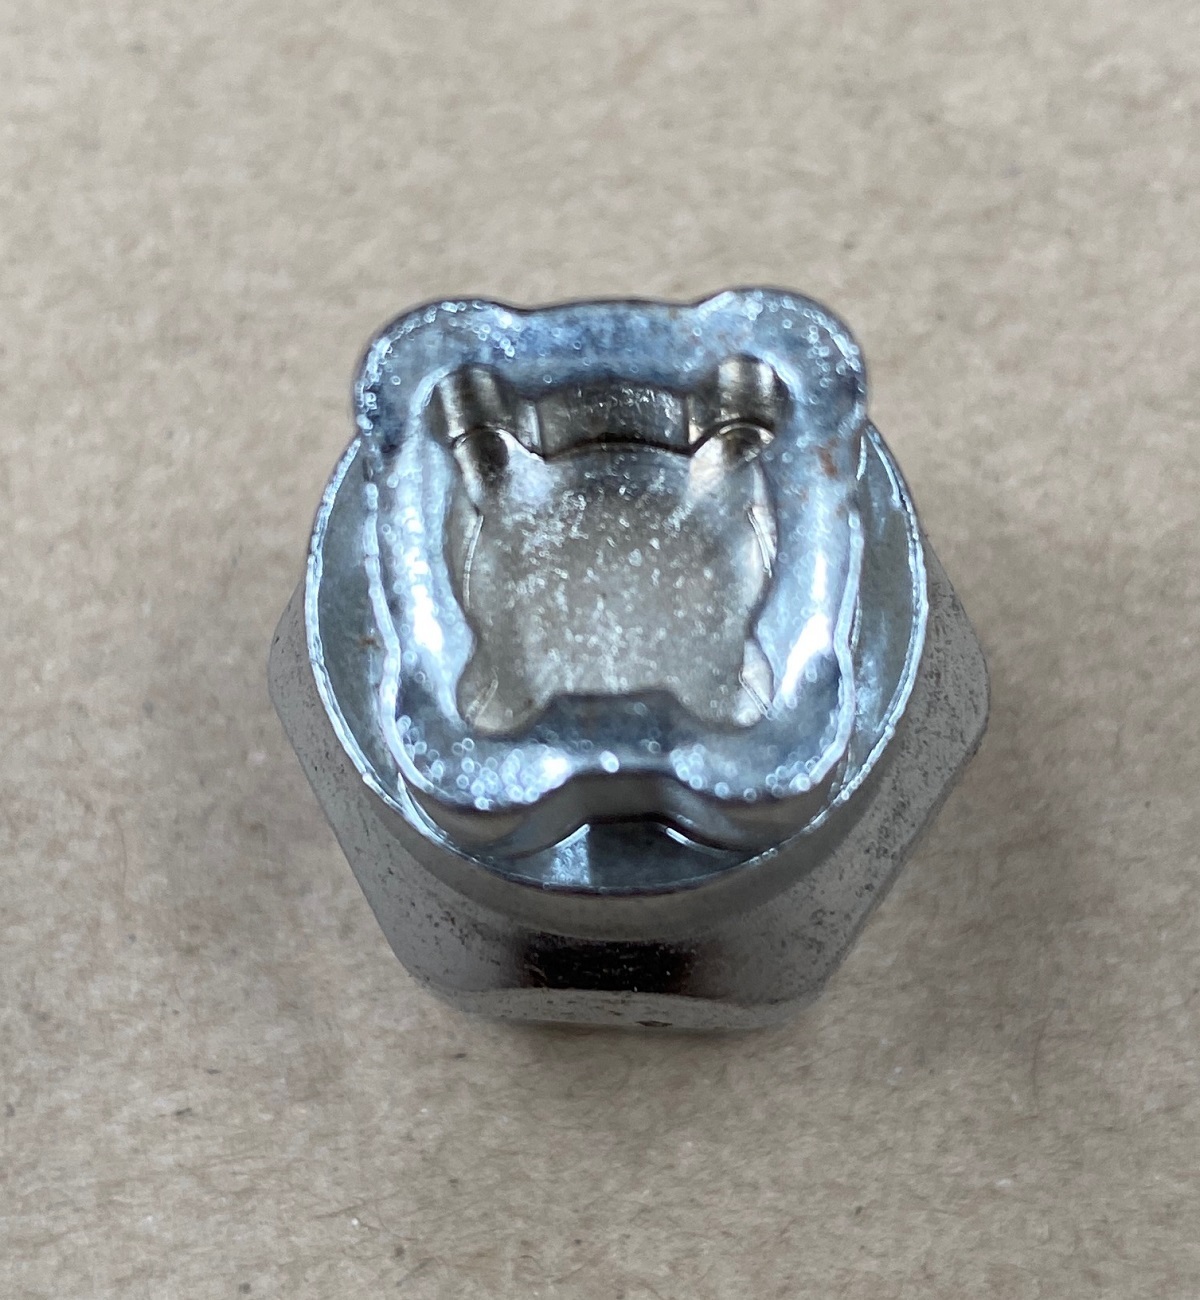 Replacement Lock Nut Key